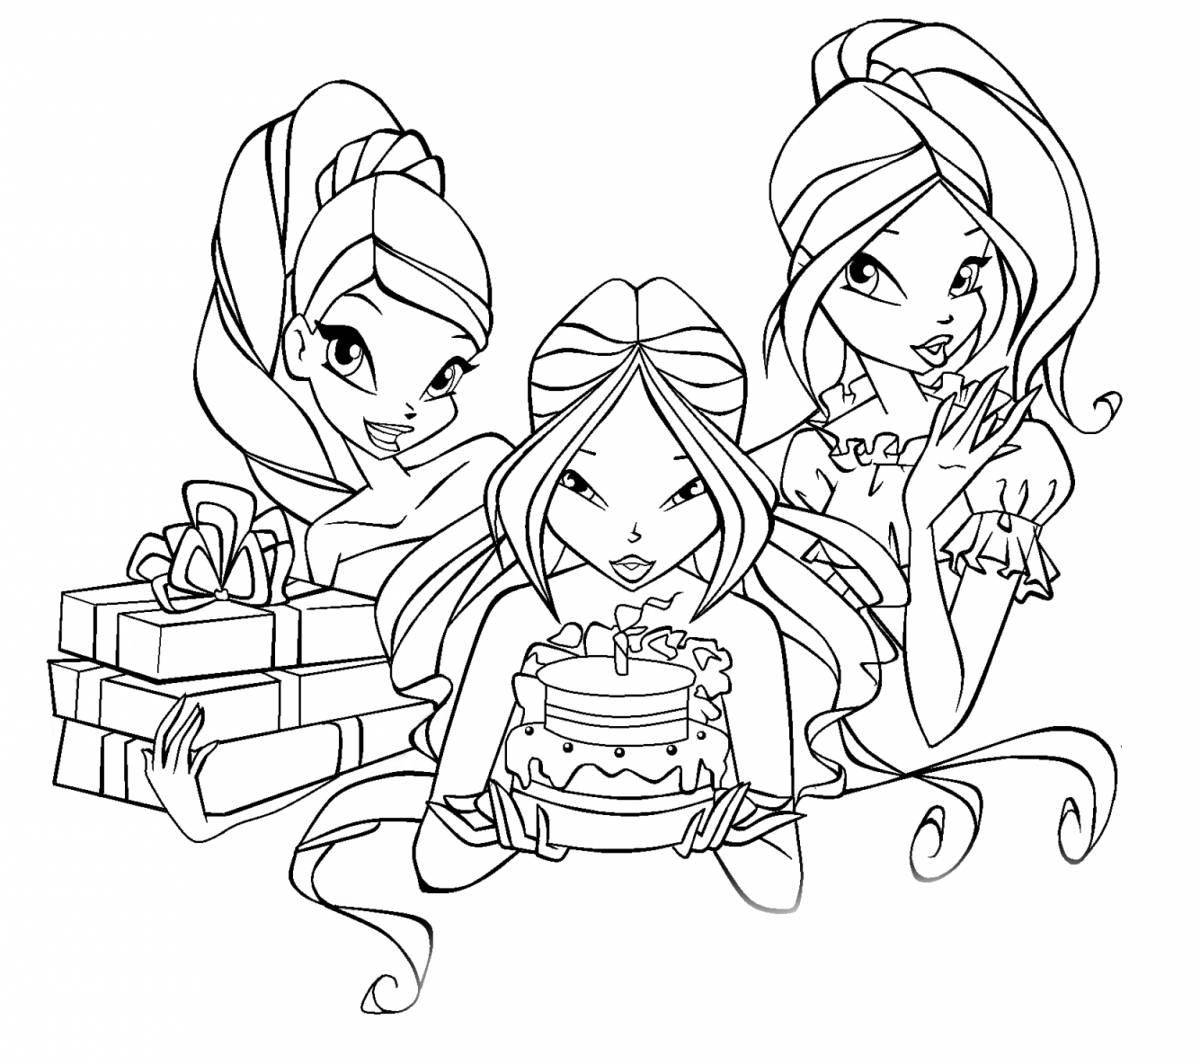 Innovative winx coloring book for kids